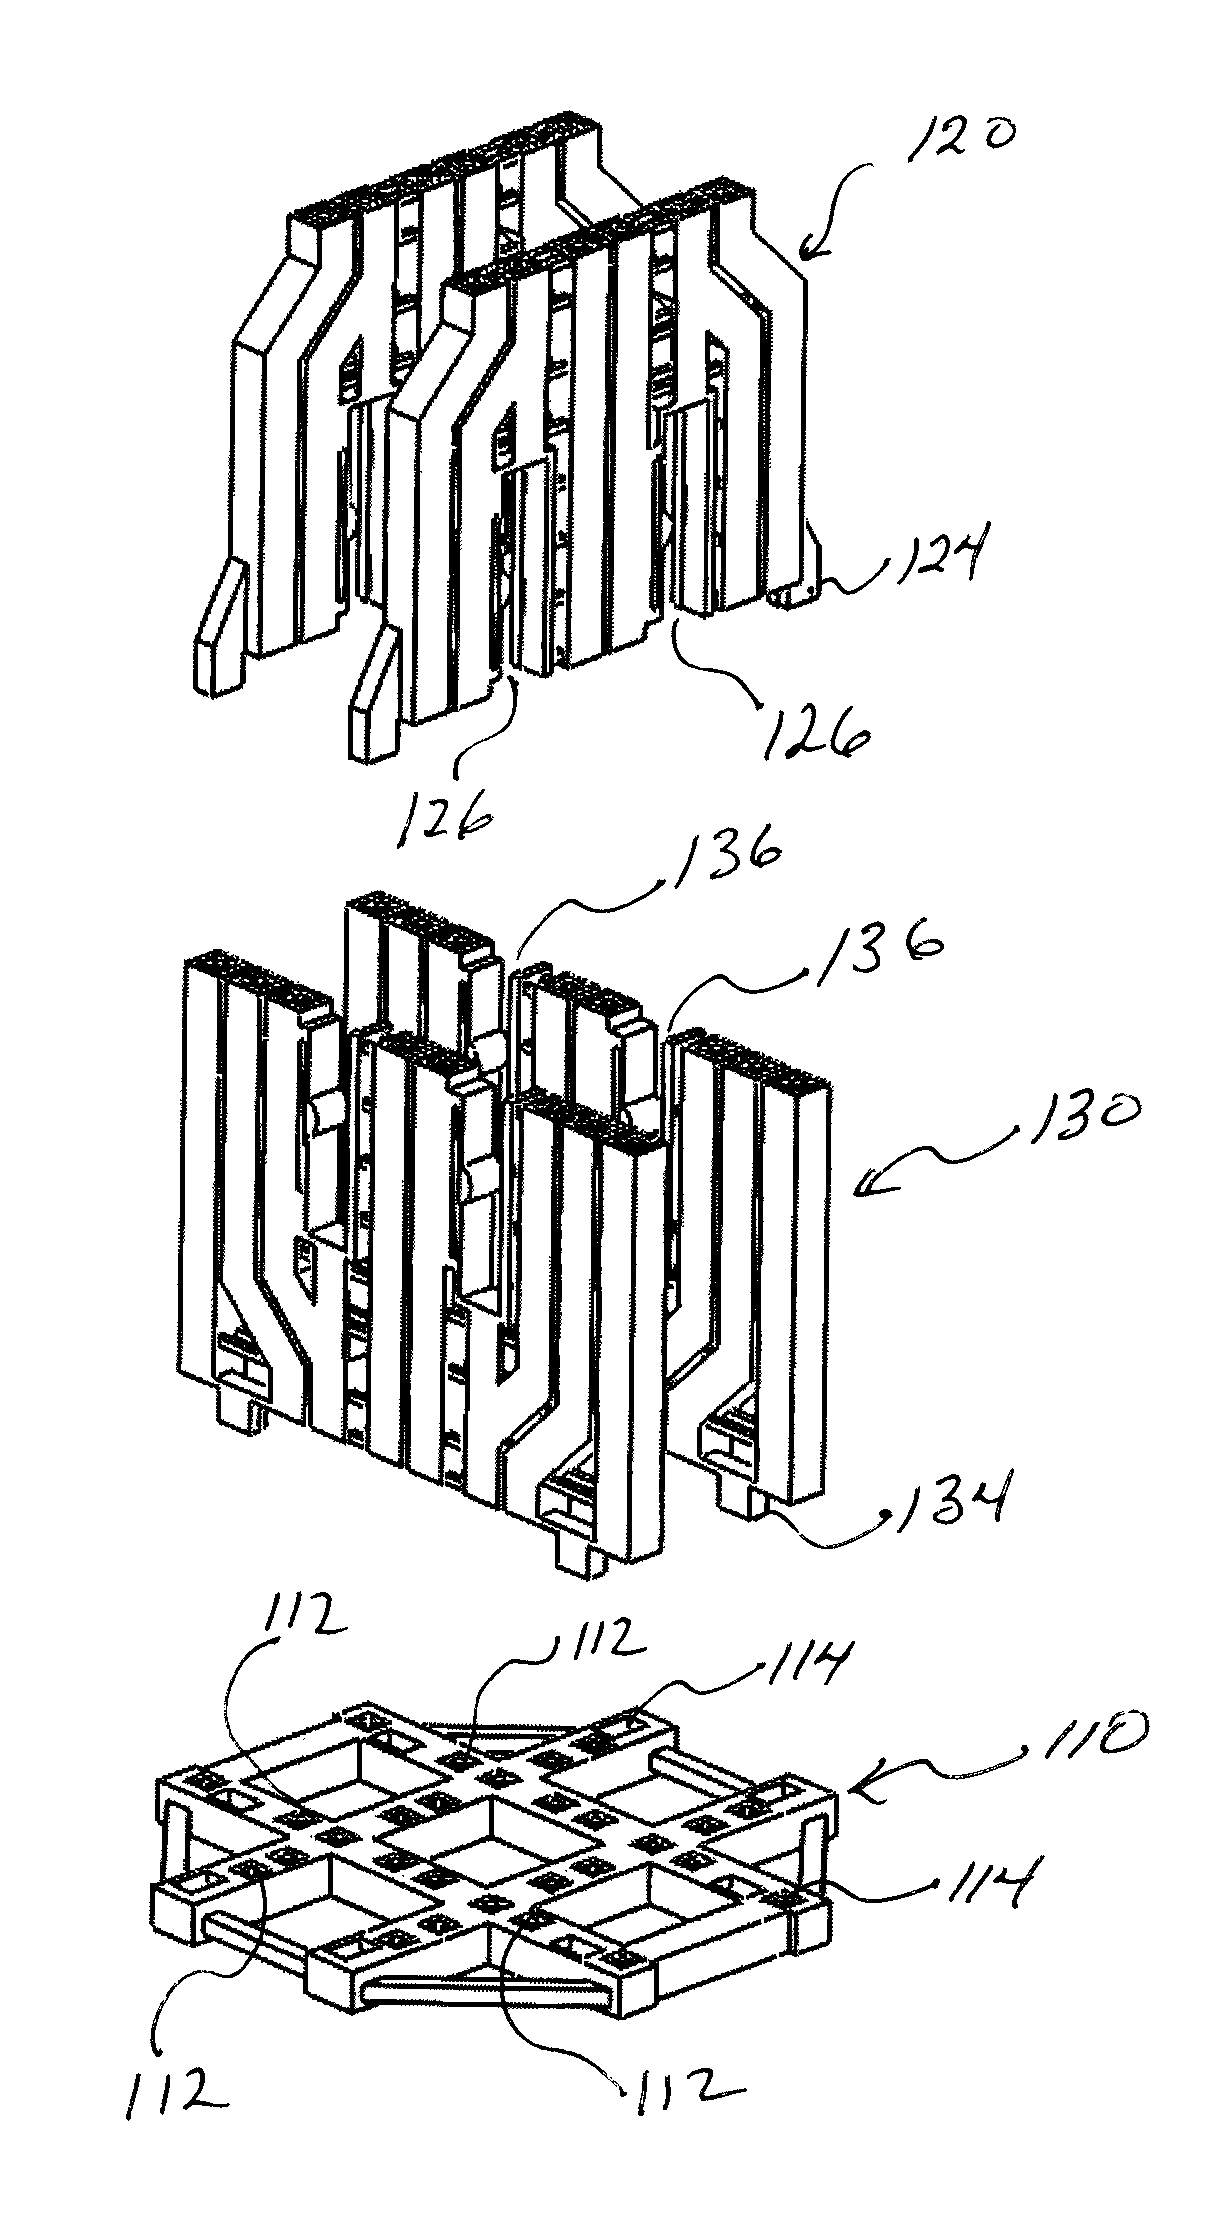 Substrate-free mechanical interconnection of electronic sub-systems using a spring configuration